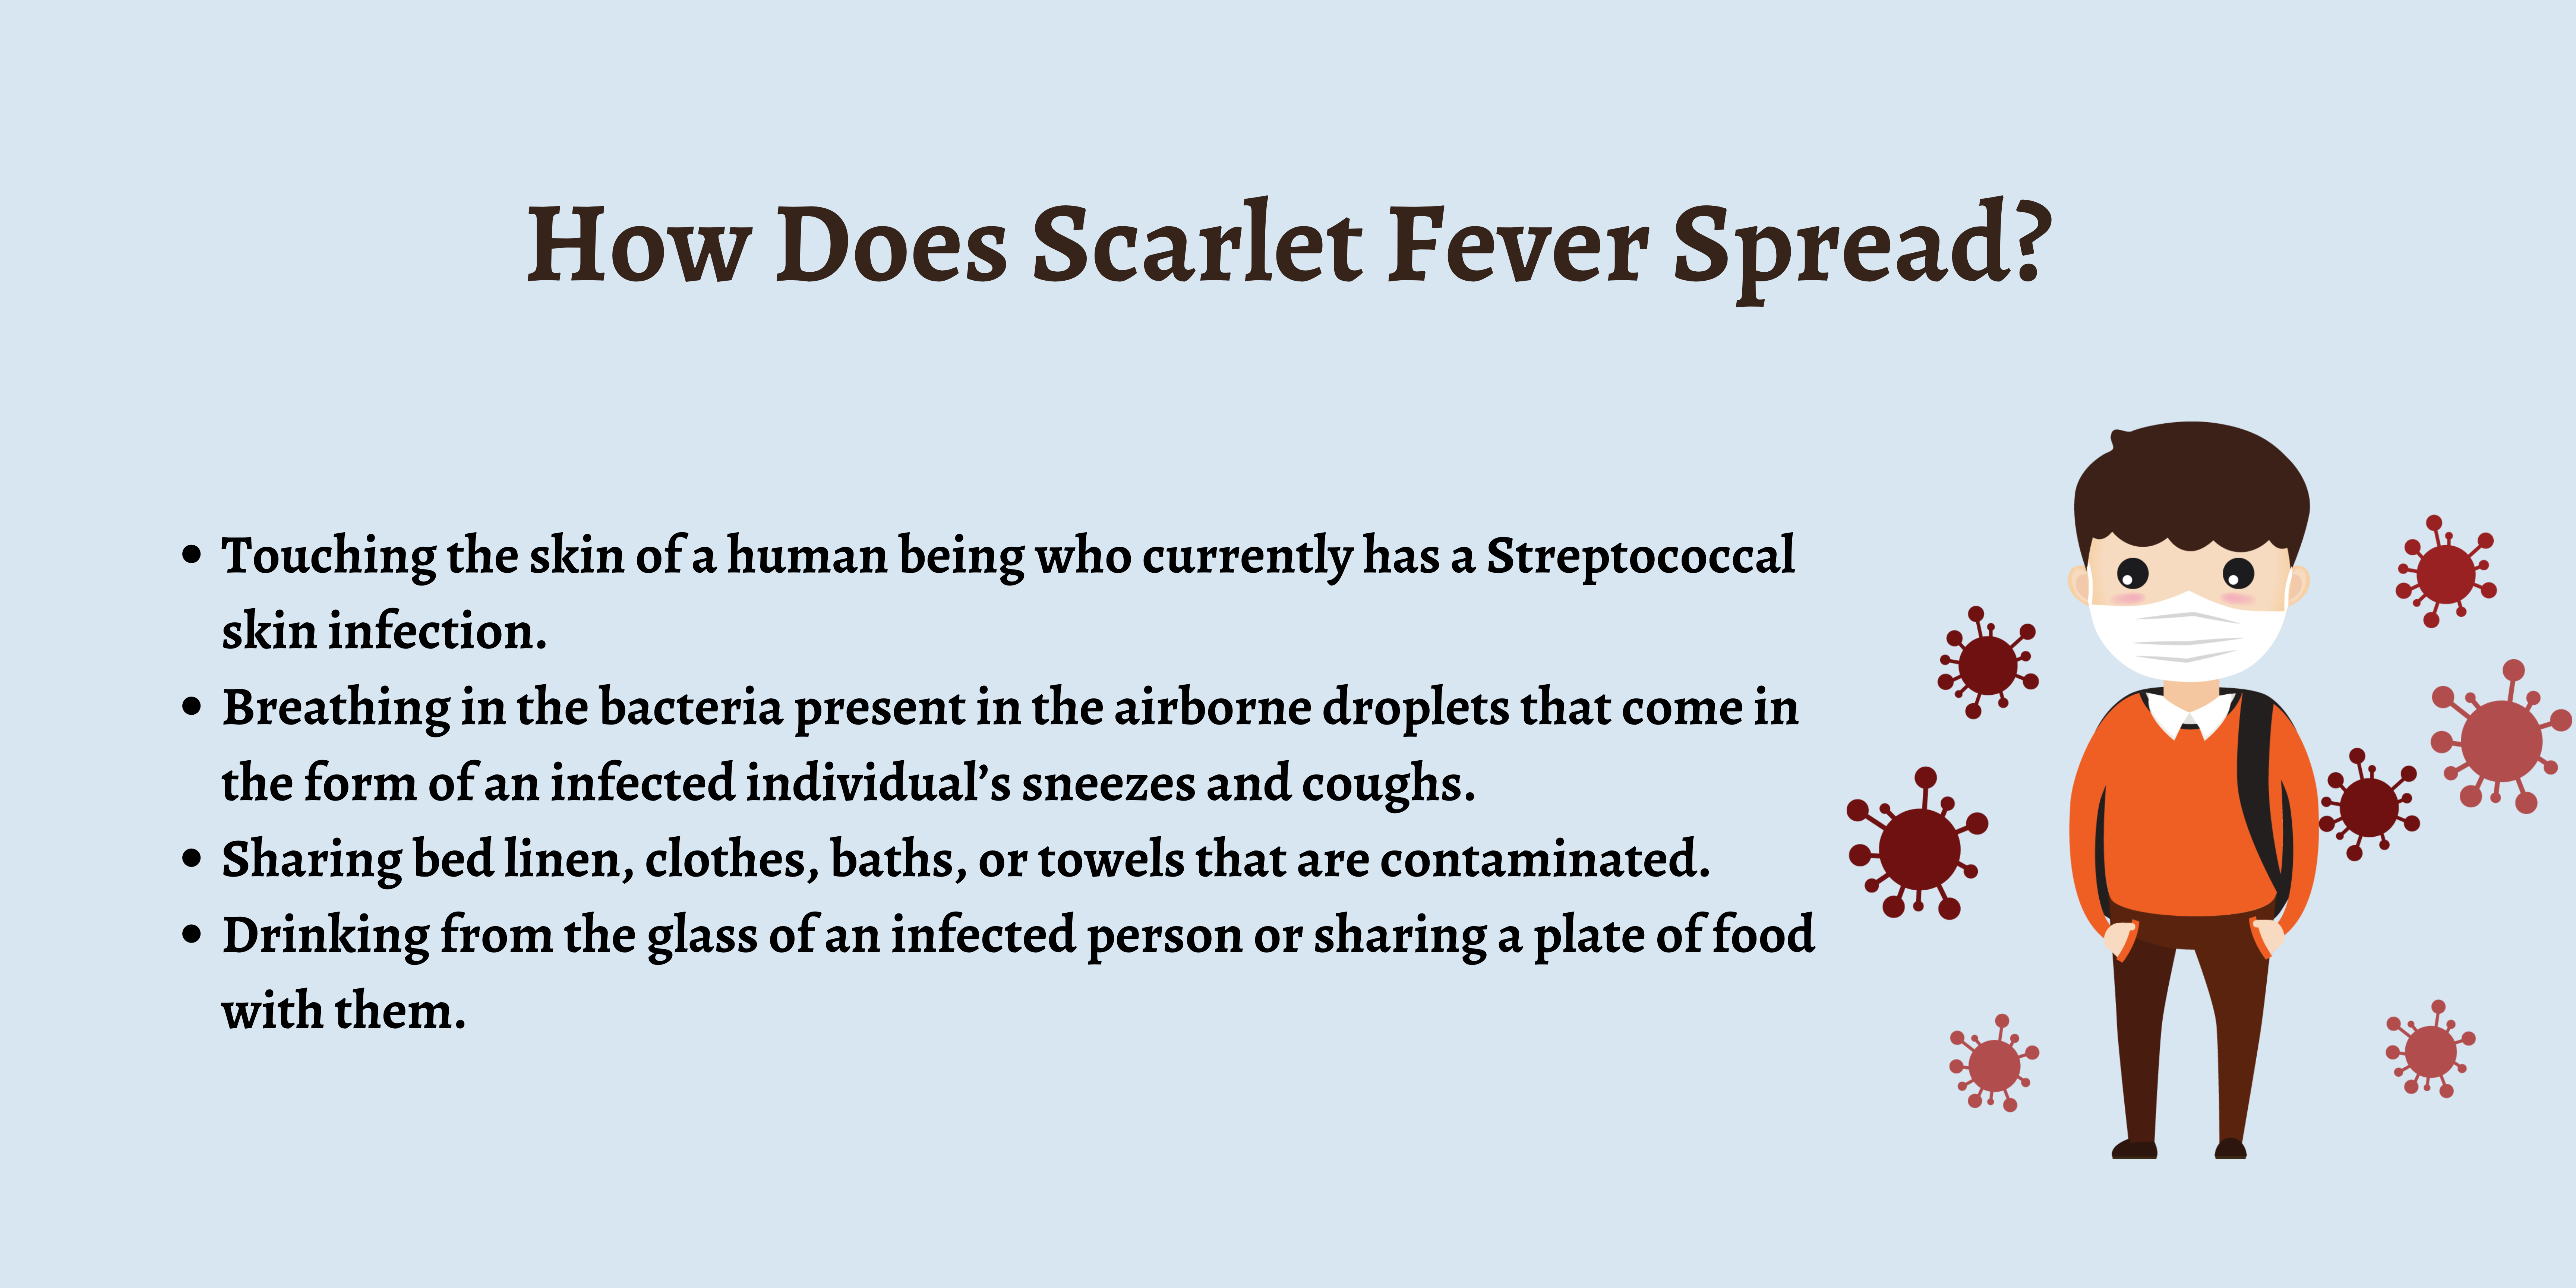 Treatment of Scarlet Fever